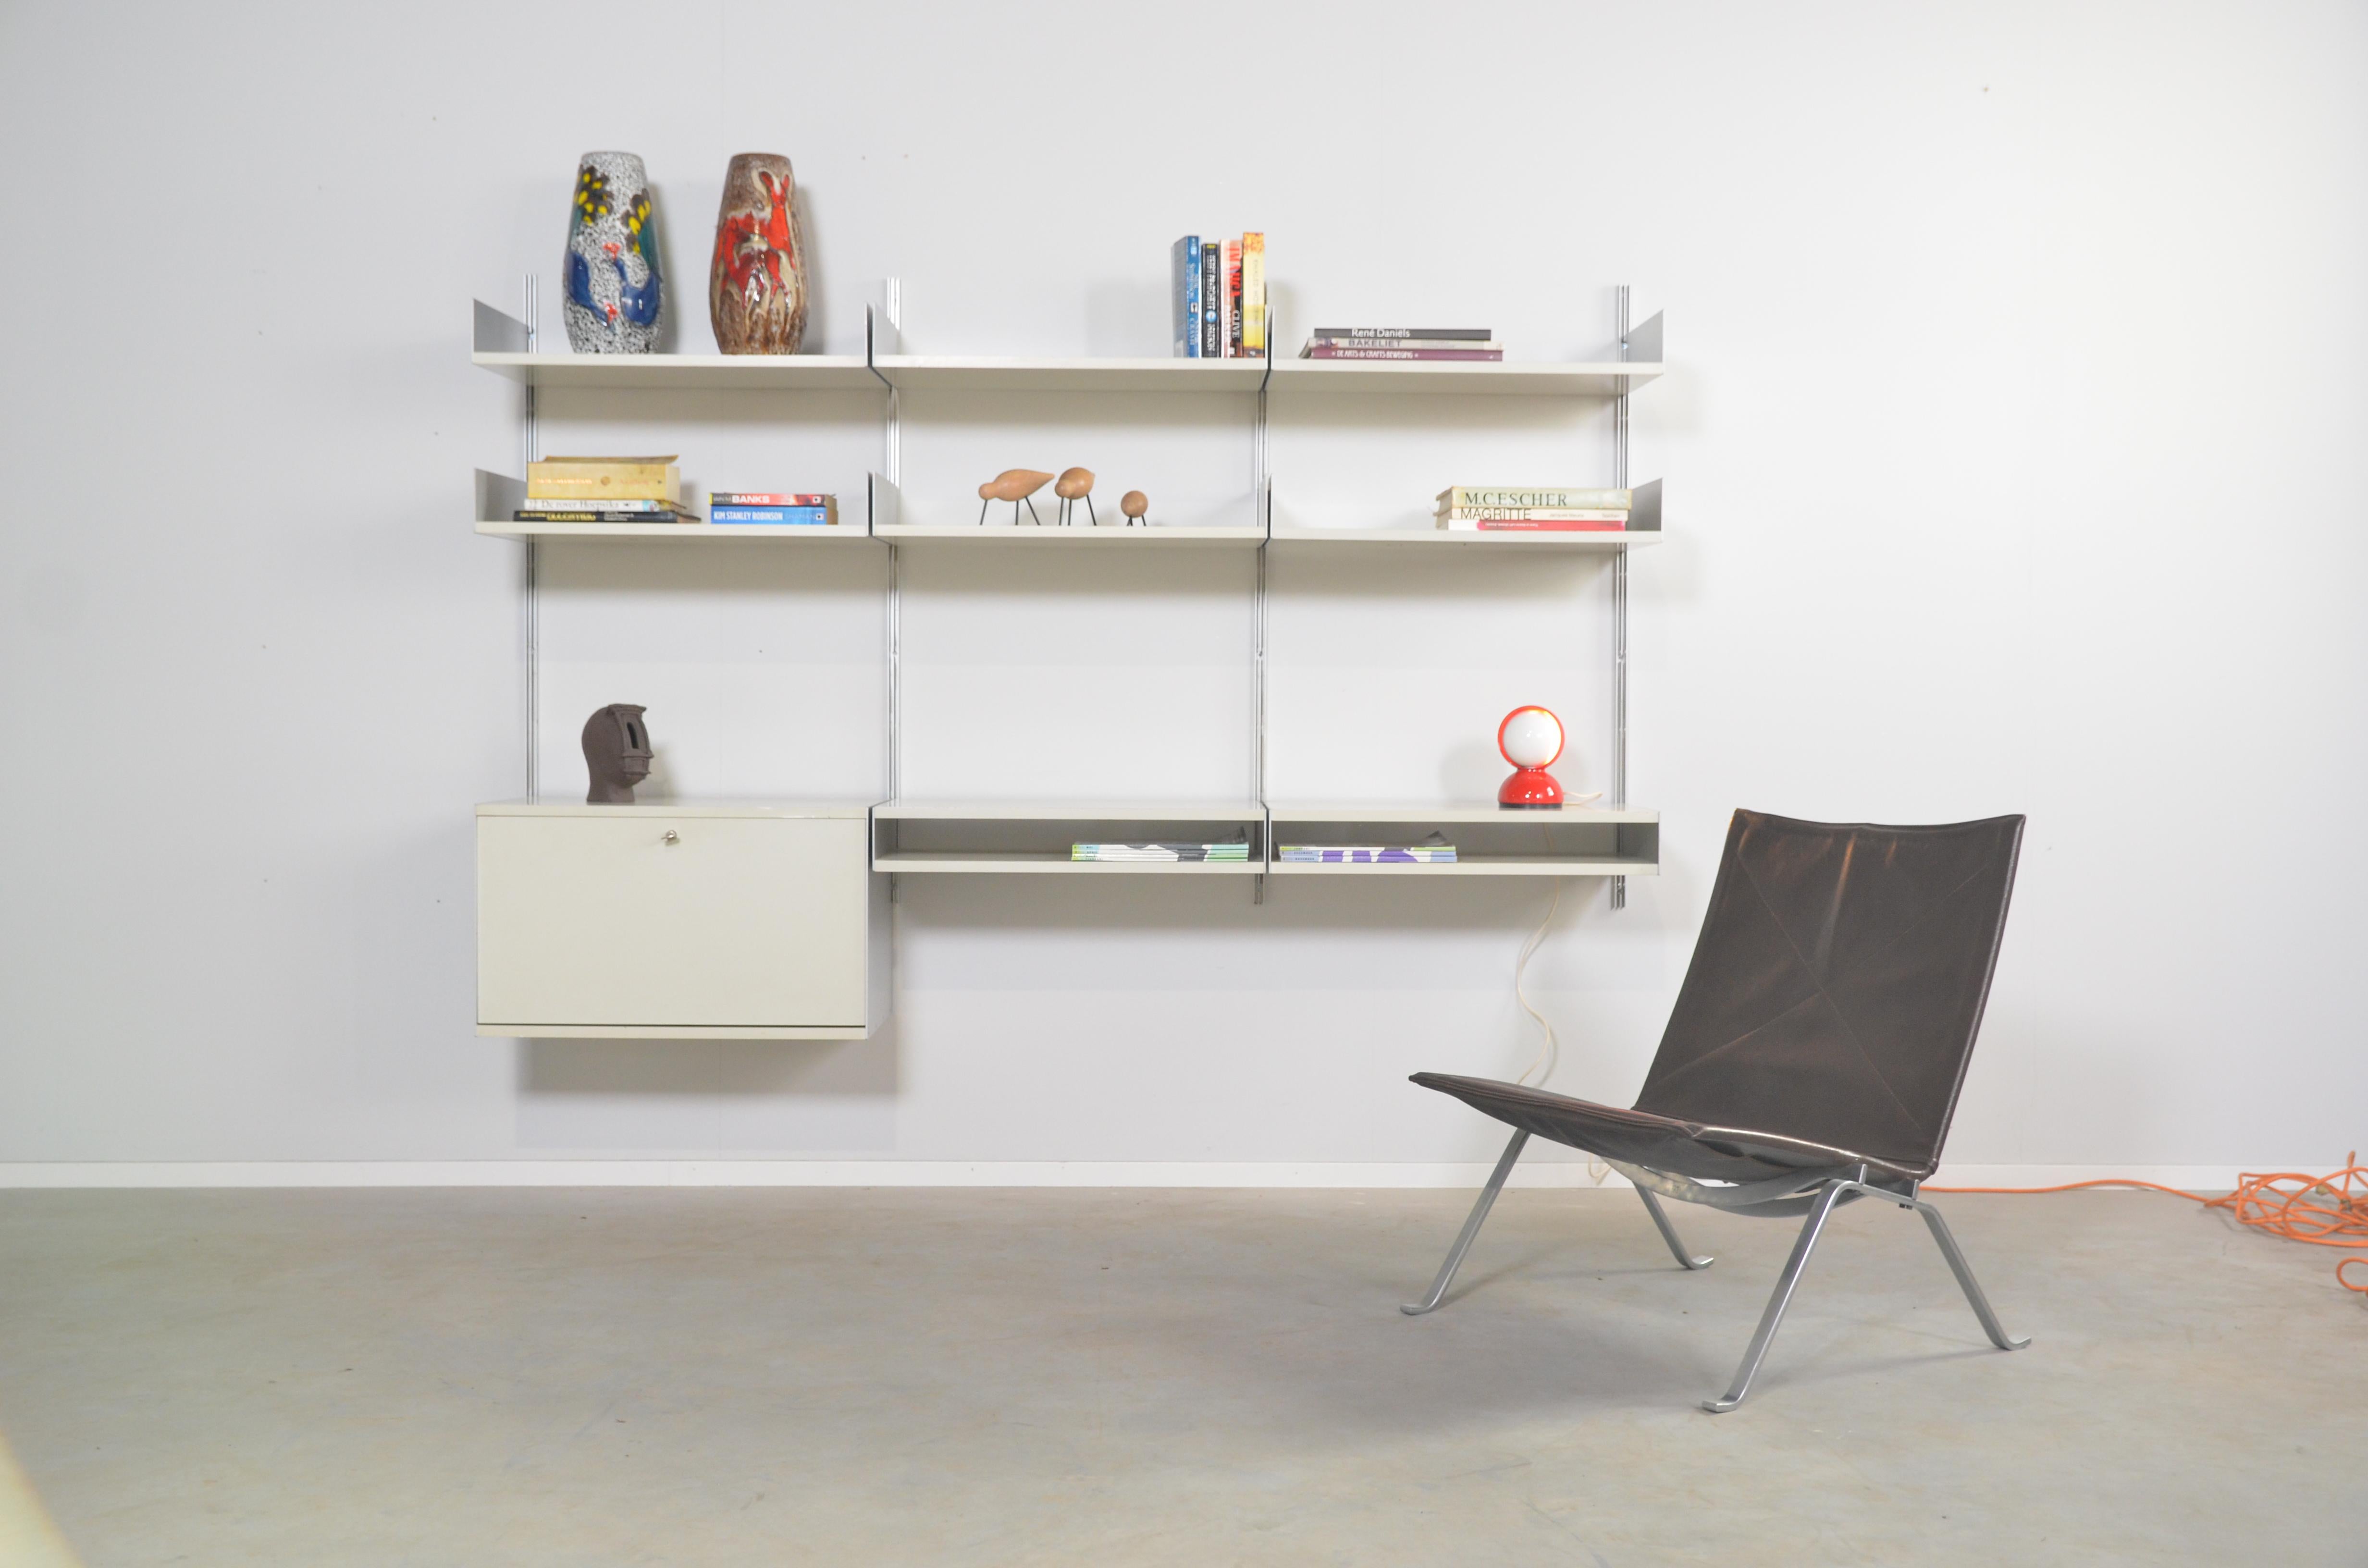 A true design classic, the 606 Universal shelving system by Dieter Rams. Due to the various elements and measurements of the shelves and cabinets it is timeless and flexible in it’s use.
The system consists of one cabinet (height 39.5, width 66.7,